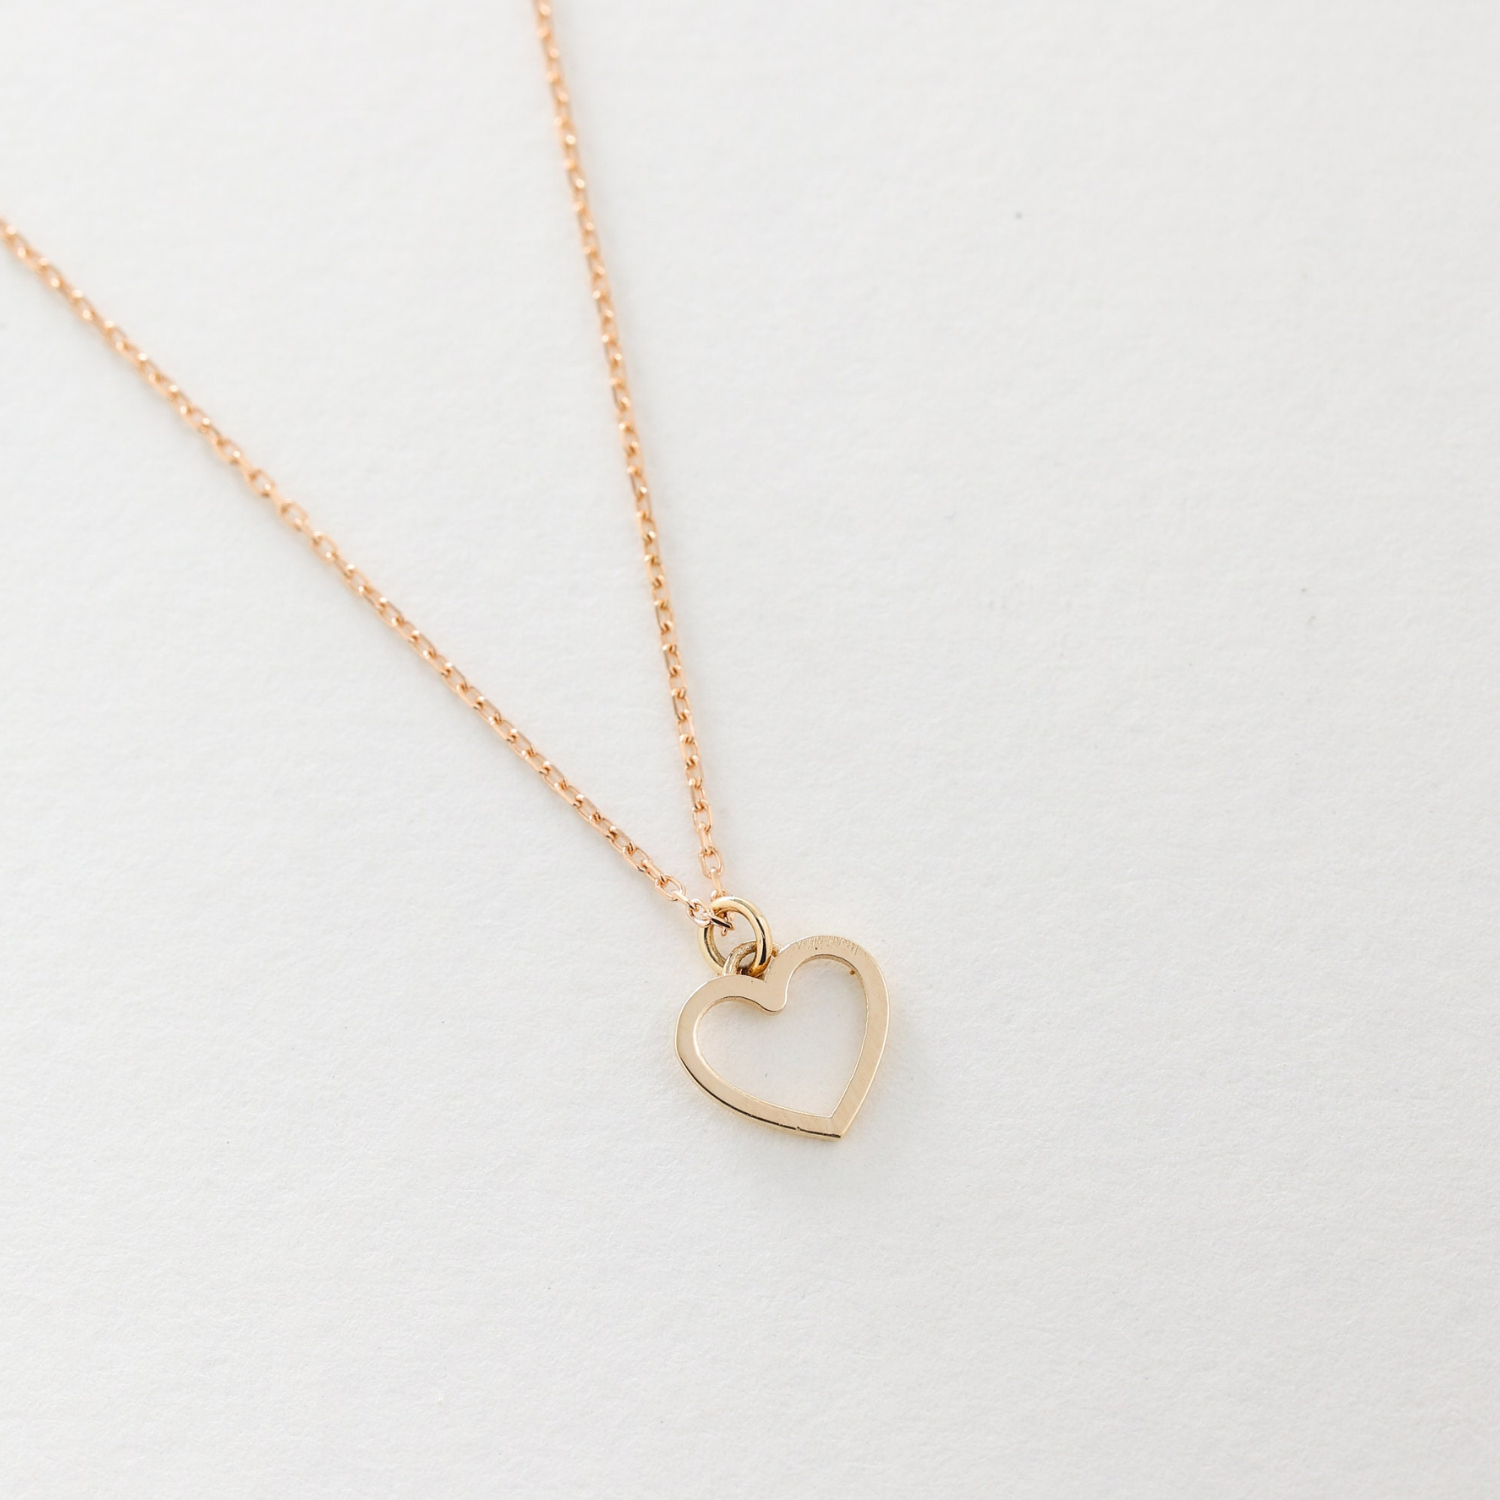 The Eternal Love Necklace